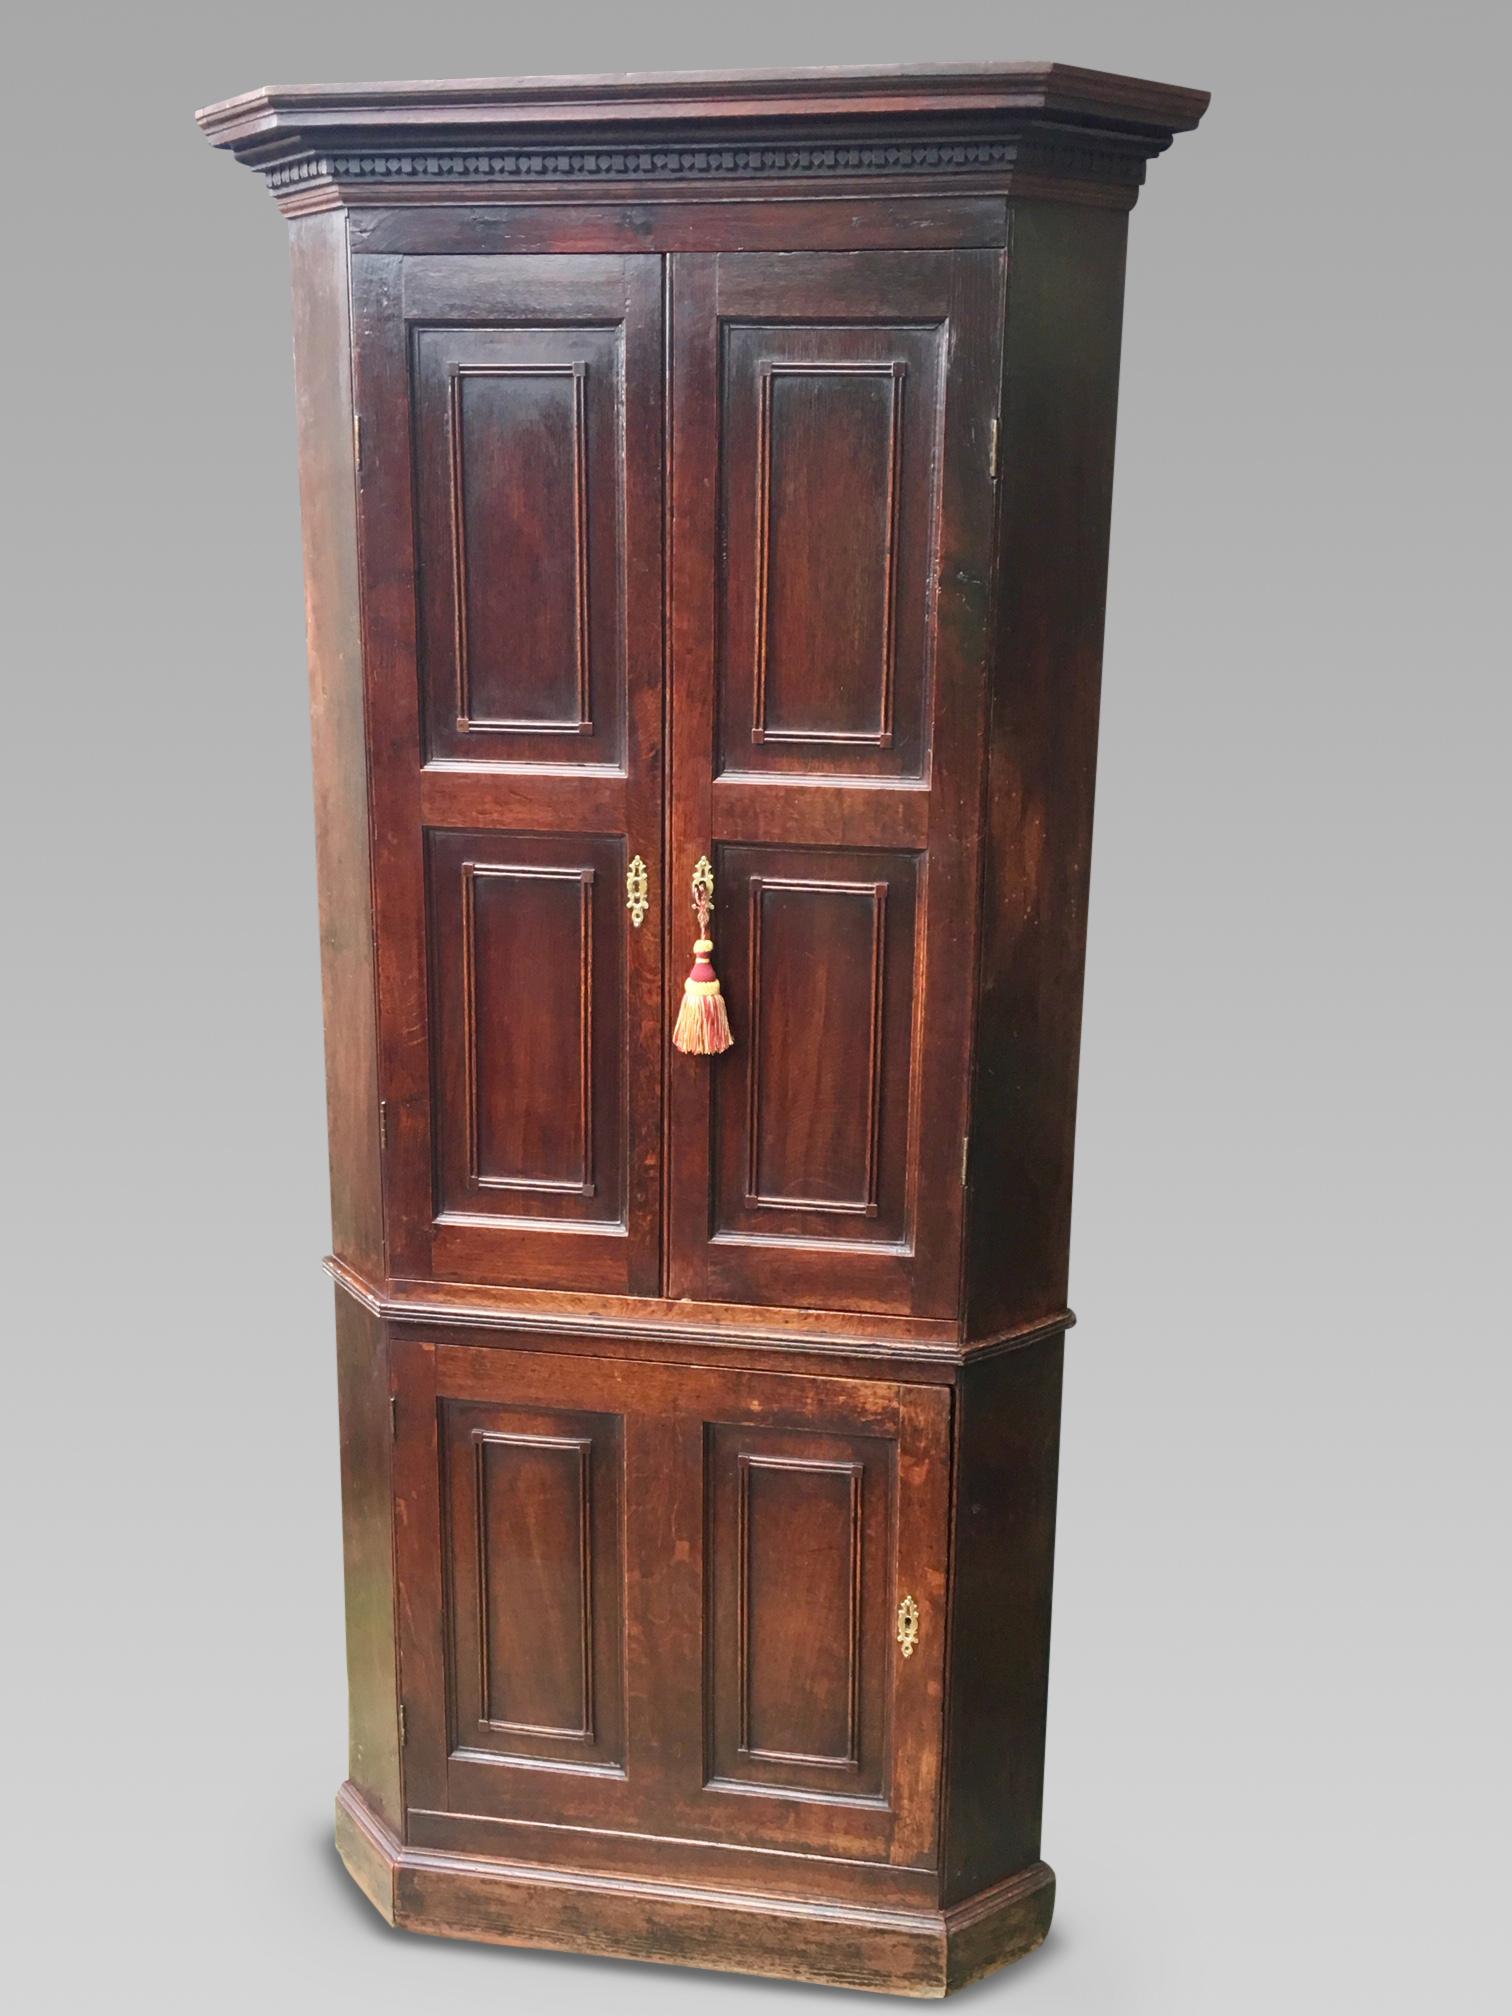 Good quality one piece Oak corner cabinet. English, circa 1820
This cabinet has a good all round colour and patina. We have checked 
over and refurbished this piece and finally wax polished it.
There is plenty of storage space. The back boards